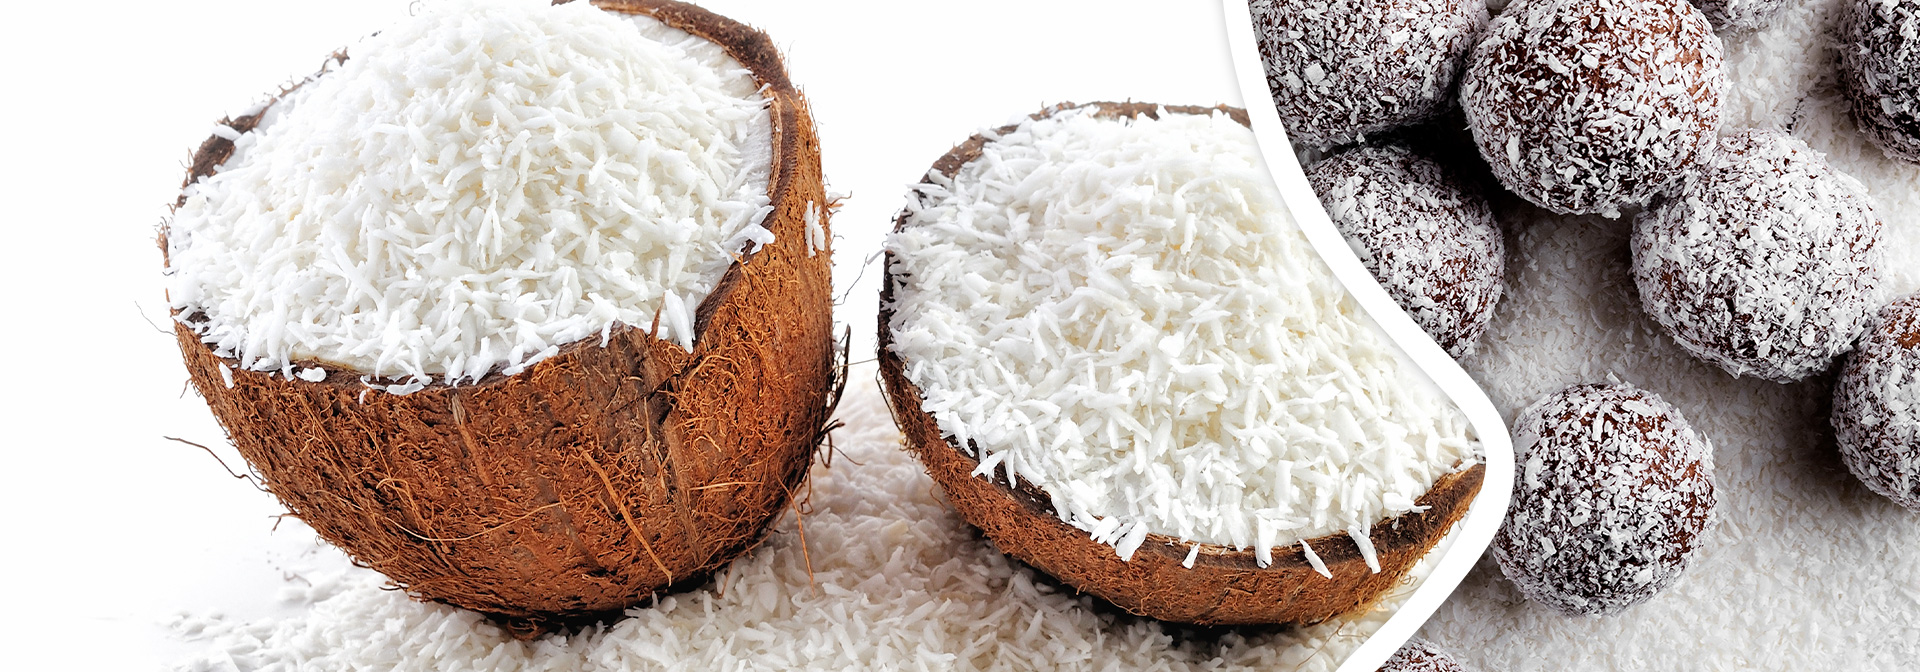 Dried coconut, wholesale for industrial use and HORECA by KALLAS INC